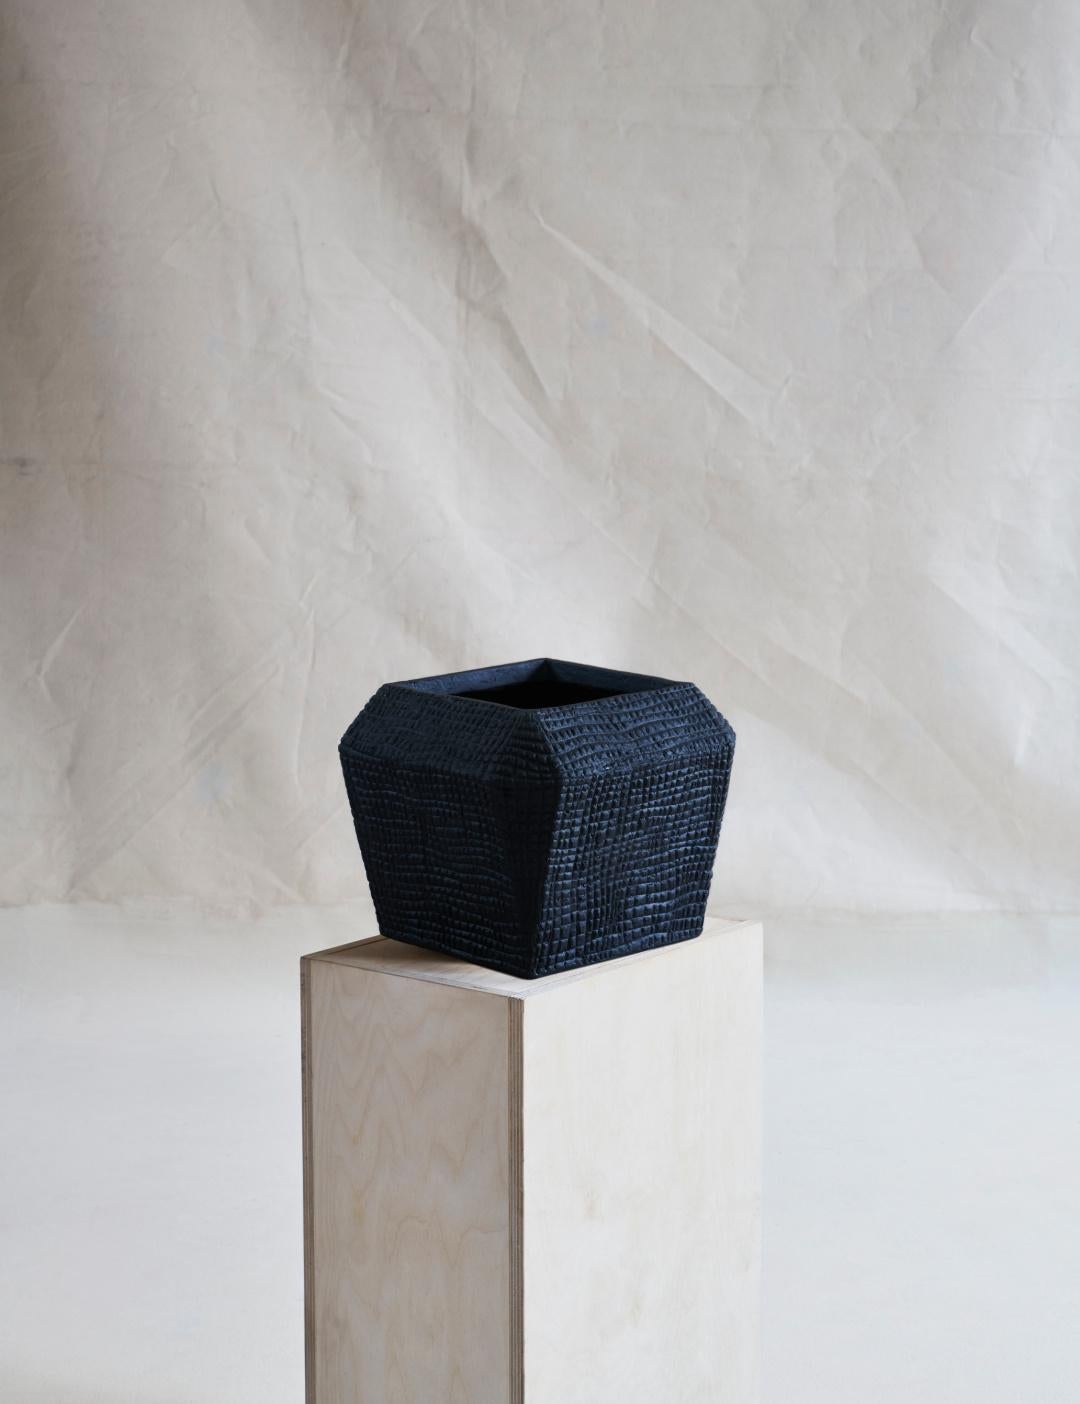 A small, stout geometric square vessel featuring a wide mouth, imprinted with a small repeating tactile texture.

For indoor or outdoor use, in covered environments.

Dimensions (in): 8